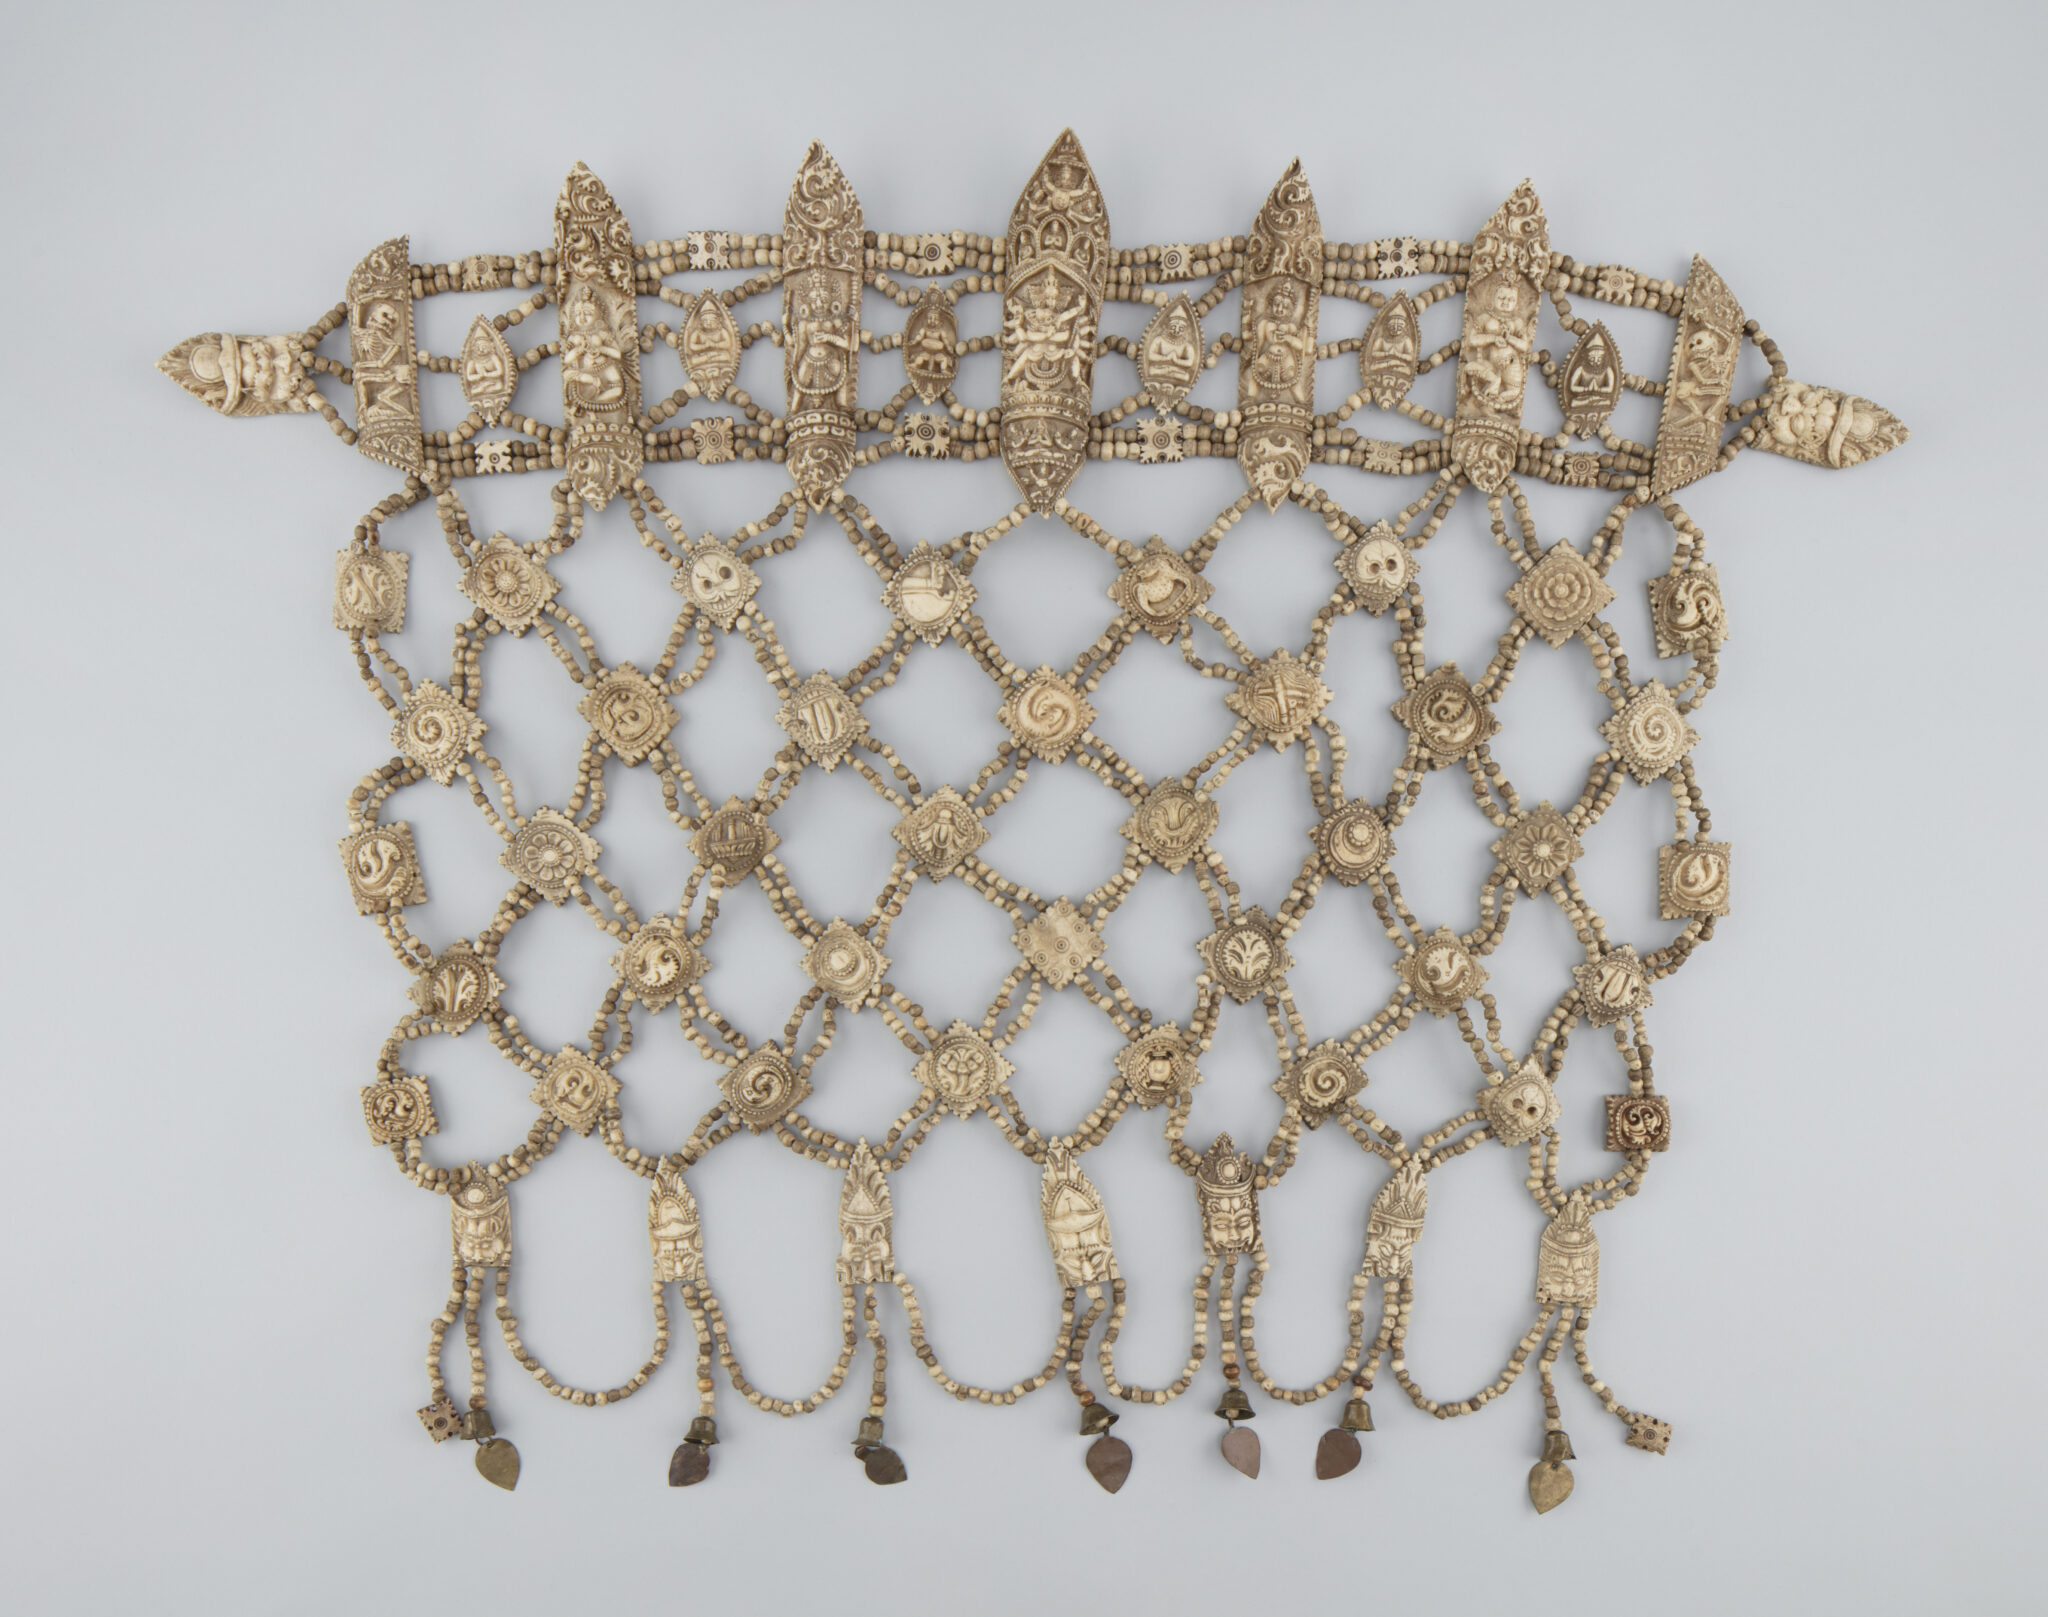 Beaded ritual garment in lattice pattern featuring belt with pointed oblong forms decorated with portraits